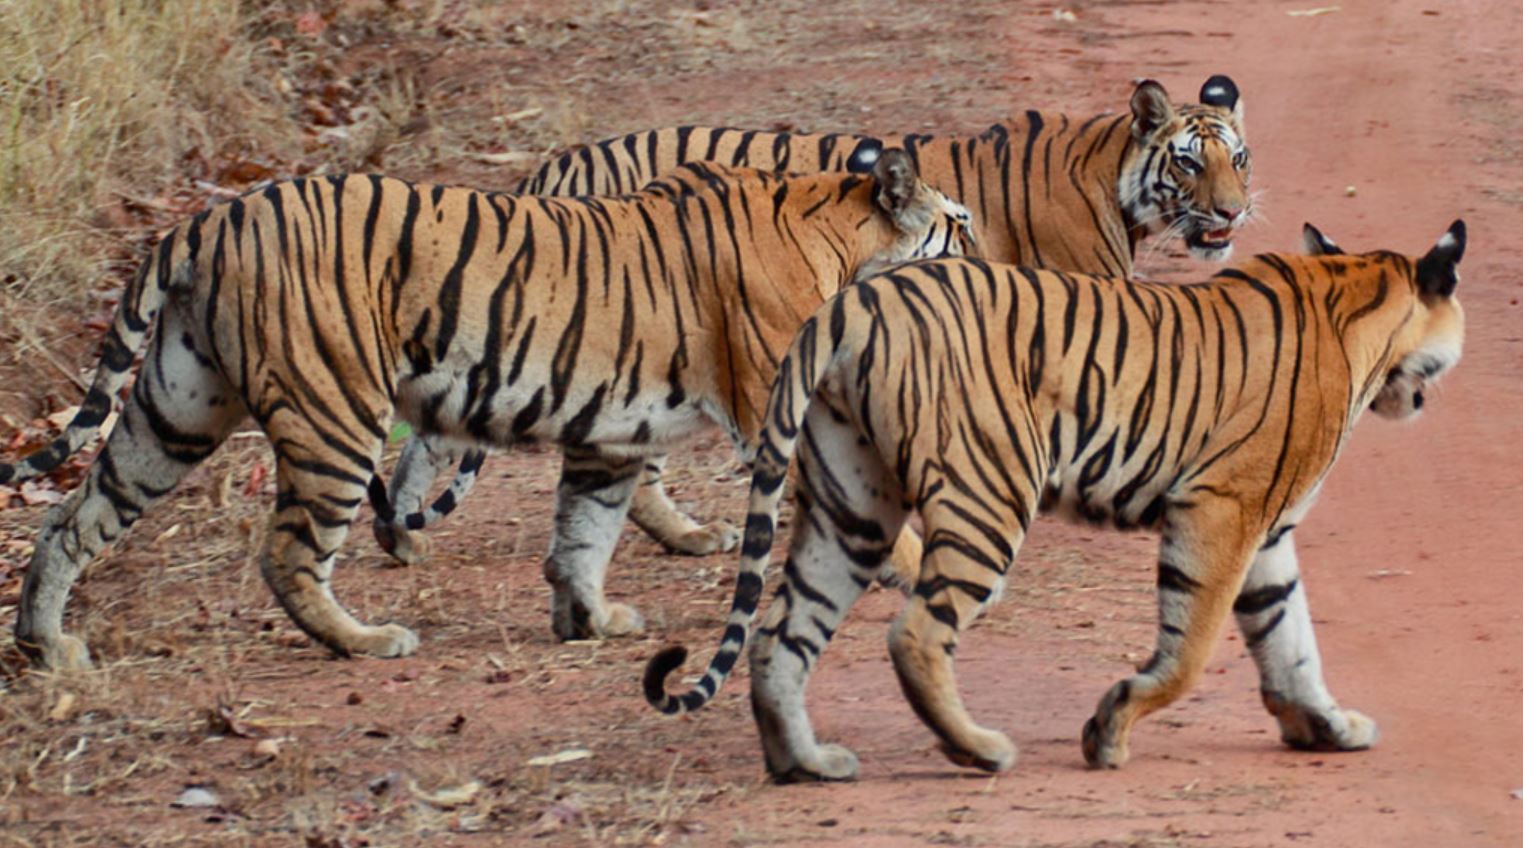 Four Tigers Mysteriously Disappeared From Ranthambore National Park Rajasthan